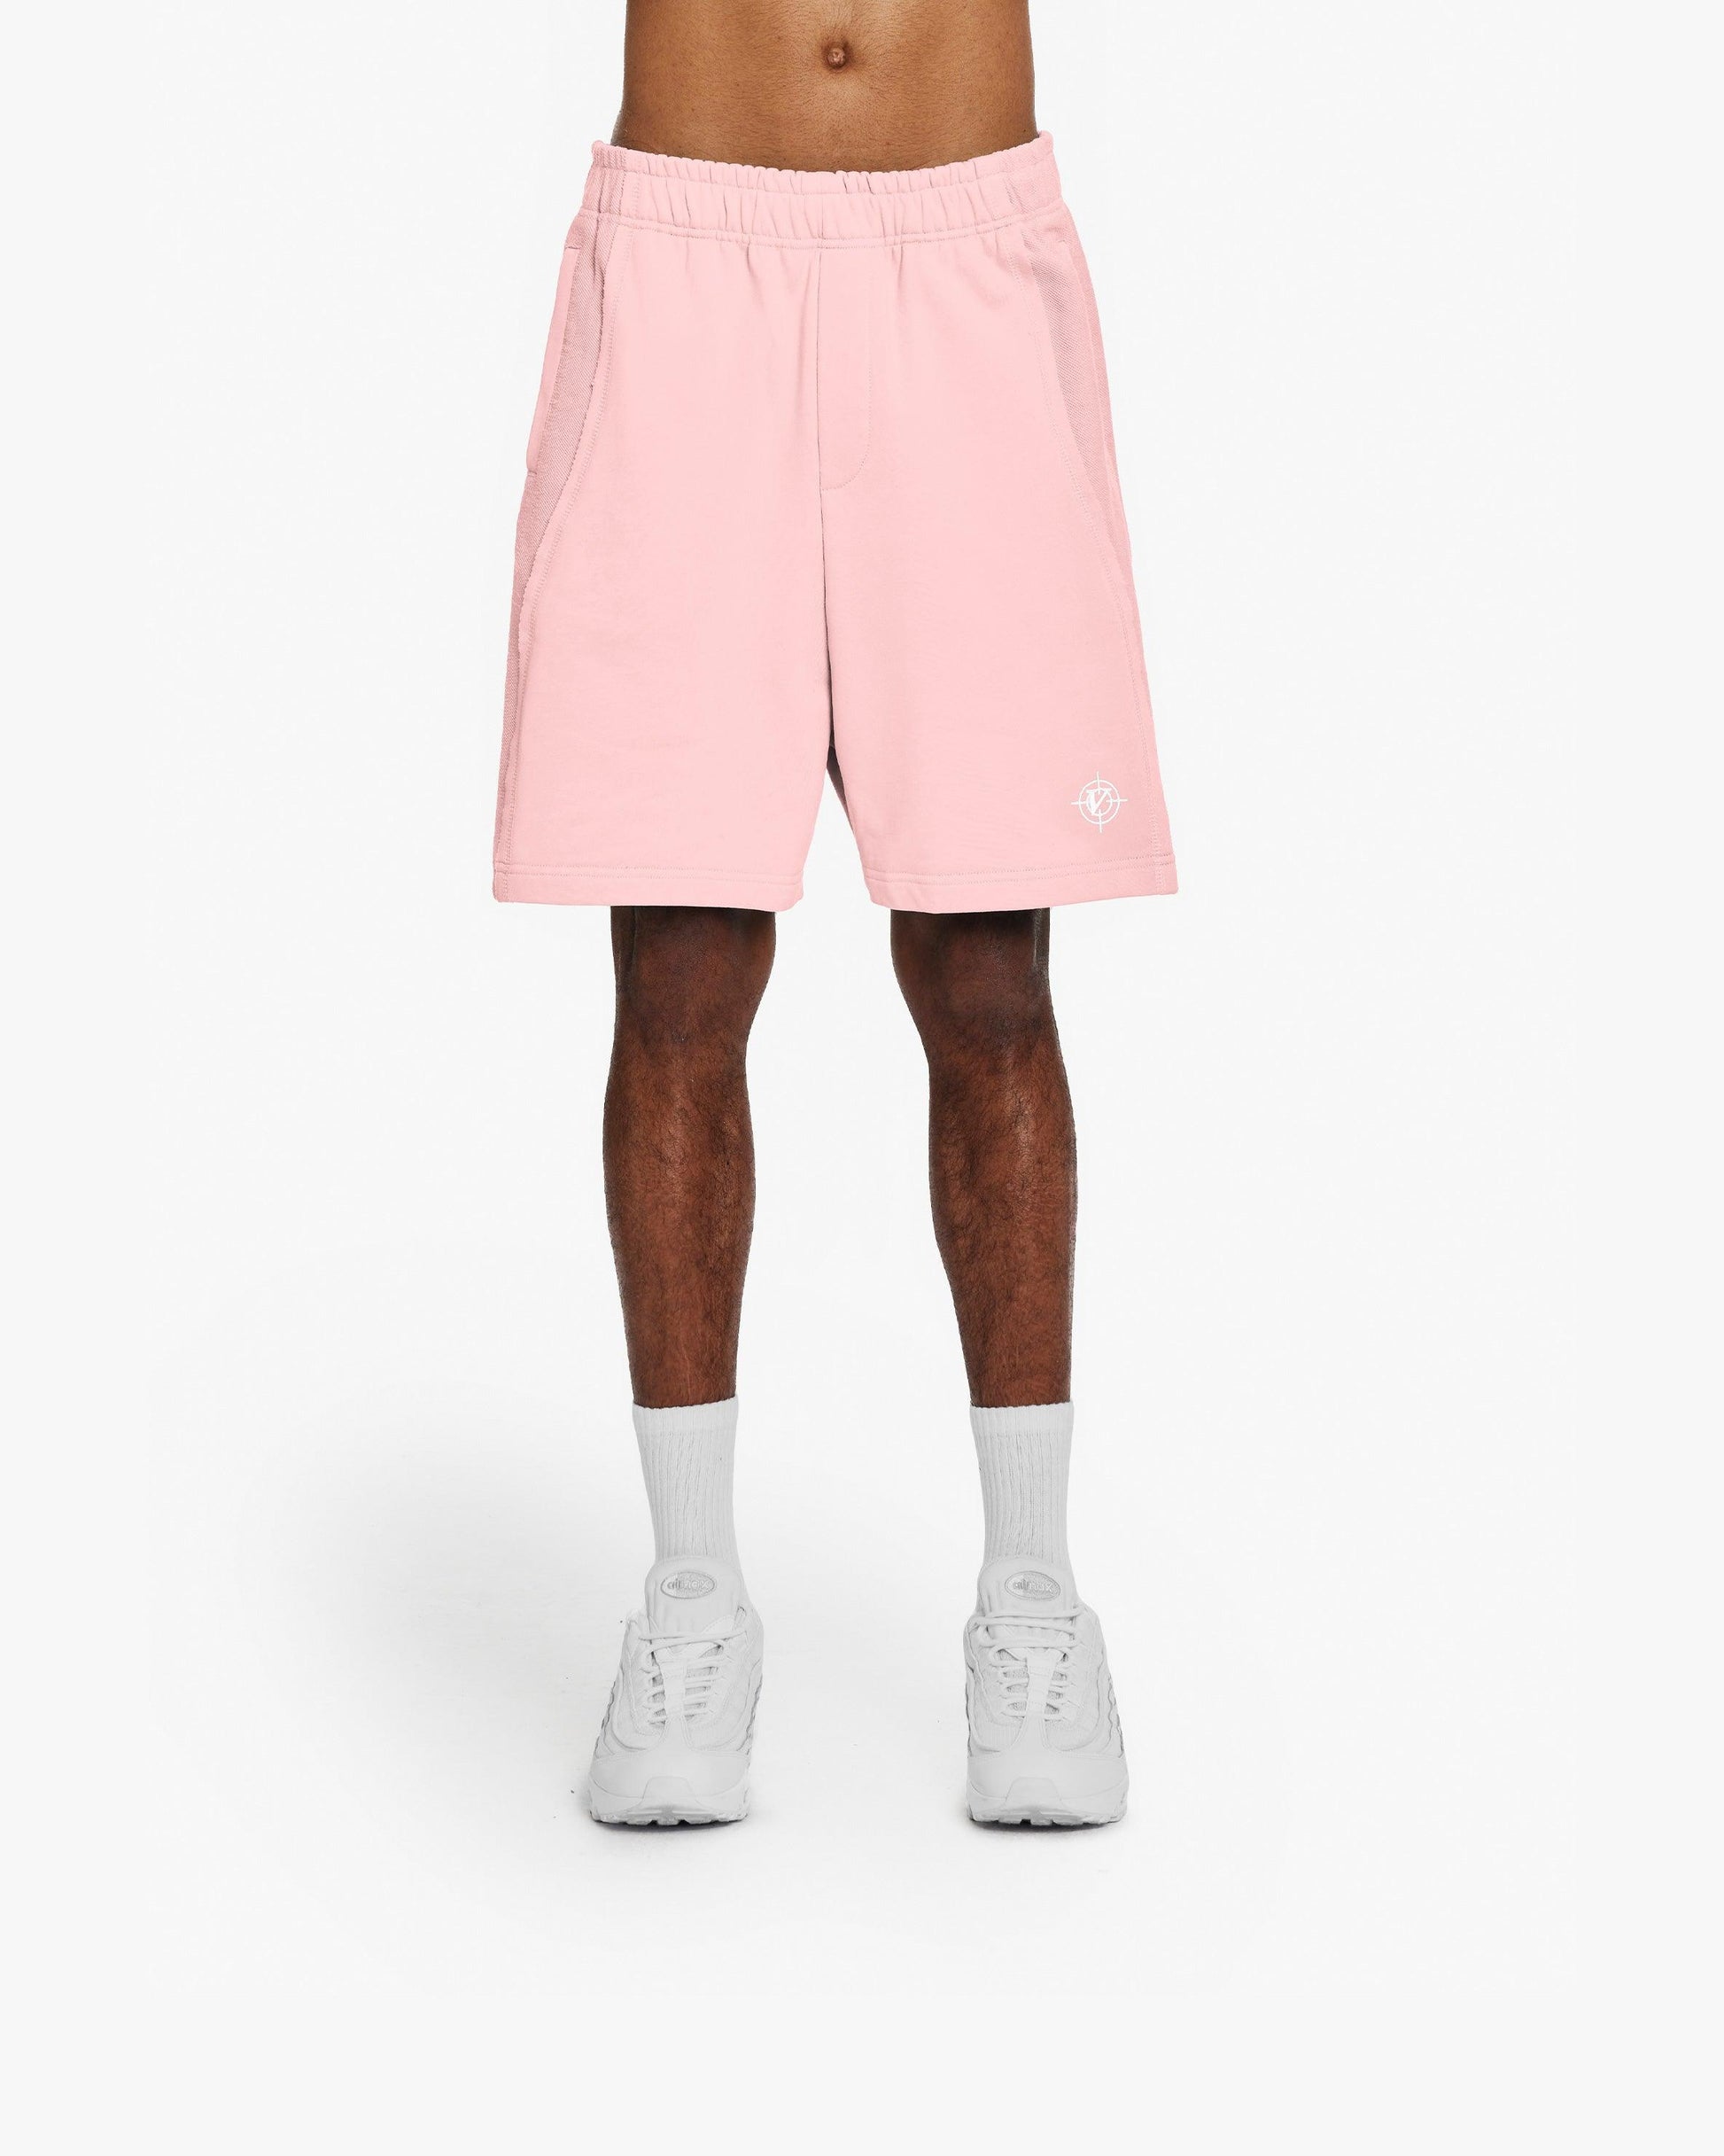 INSIDE OUT SHORTS PINK - VICINITY